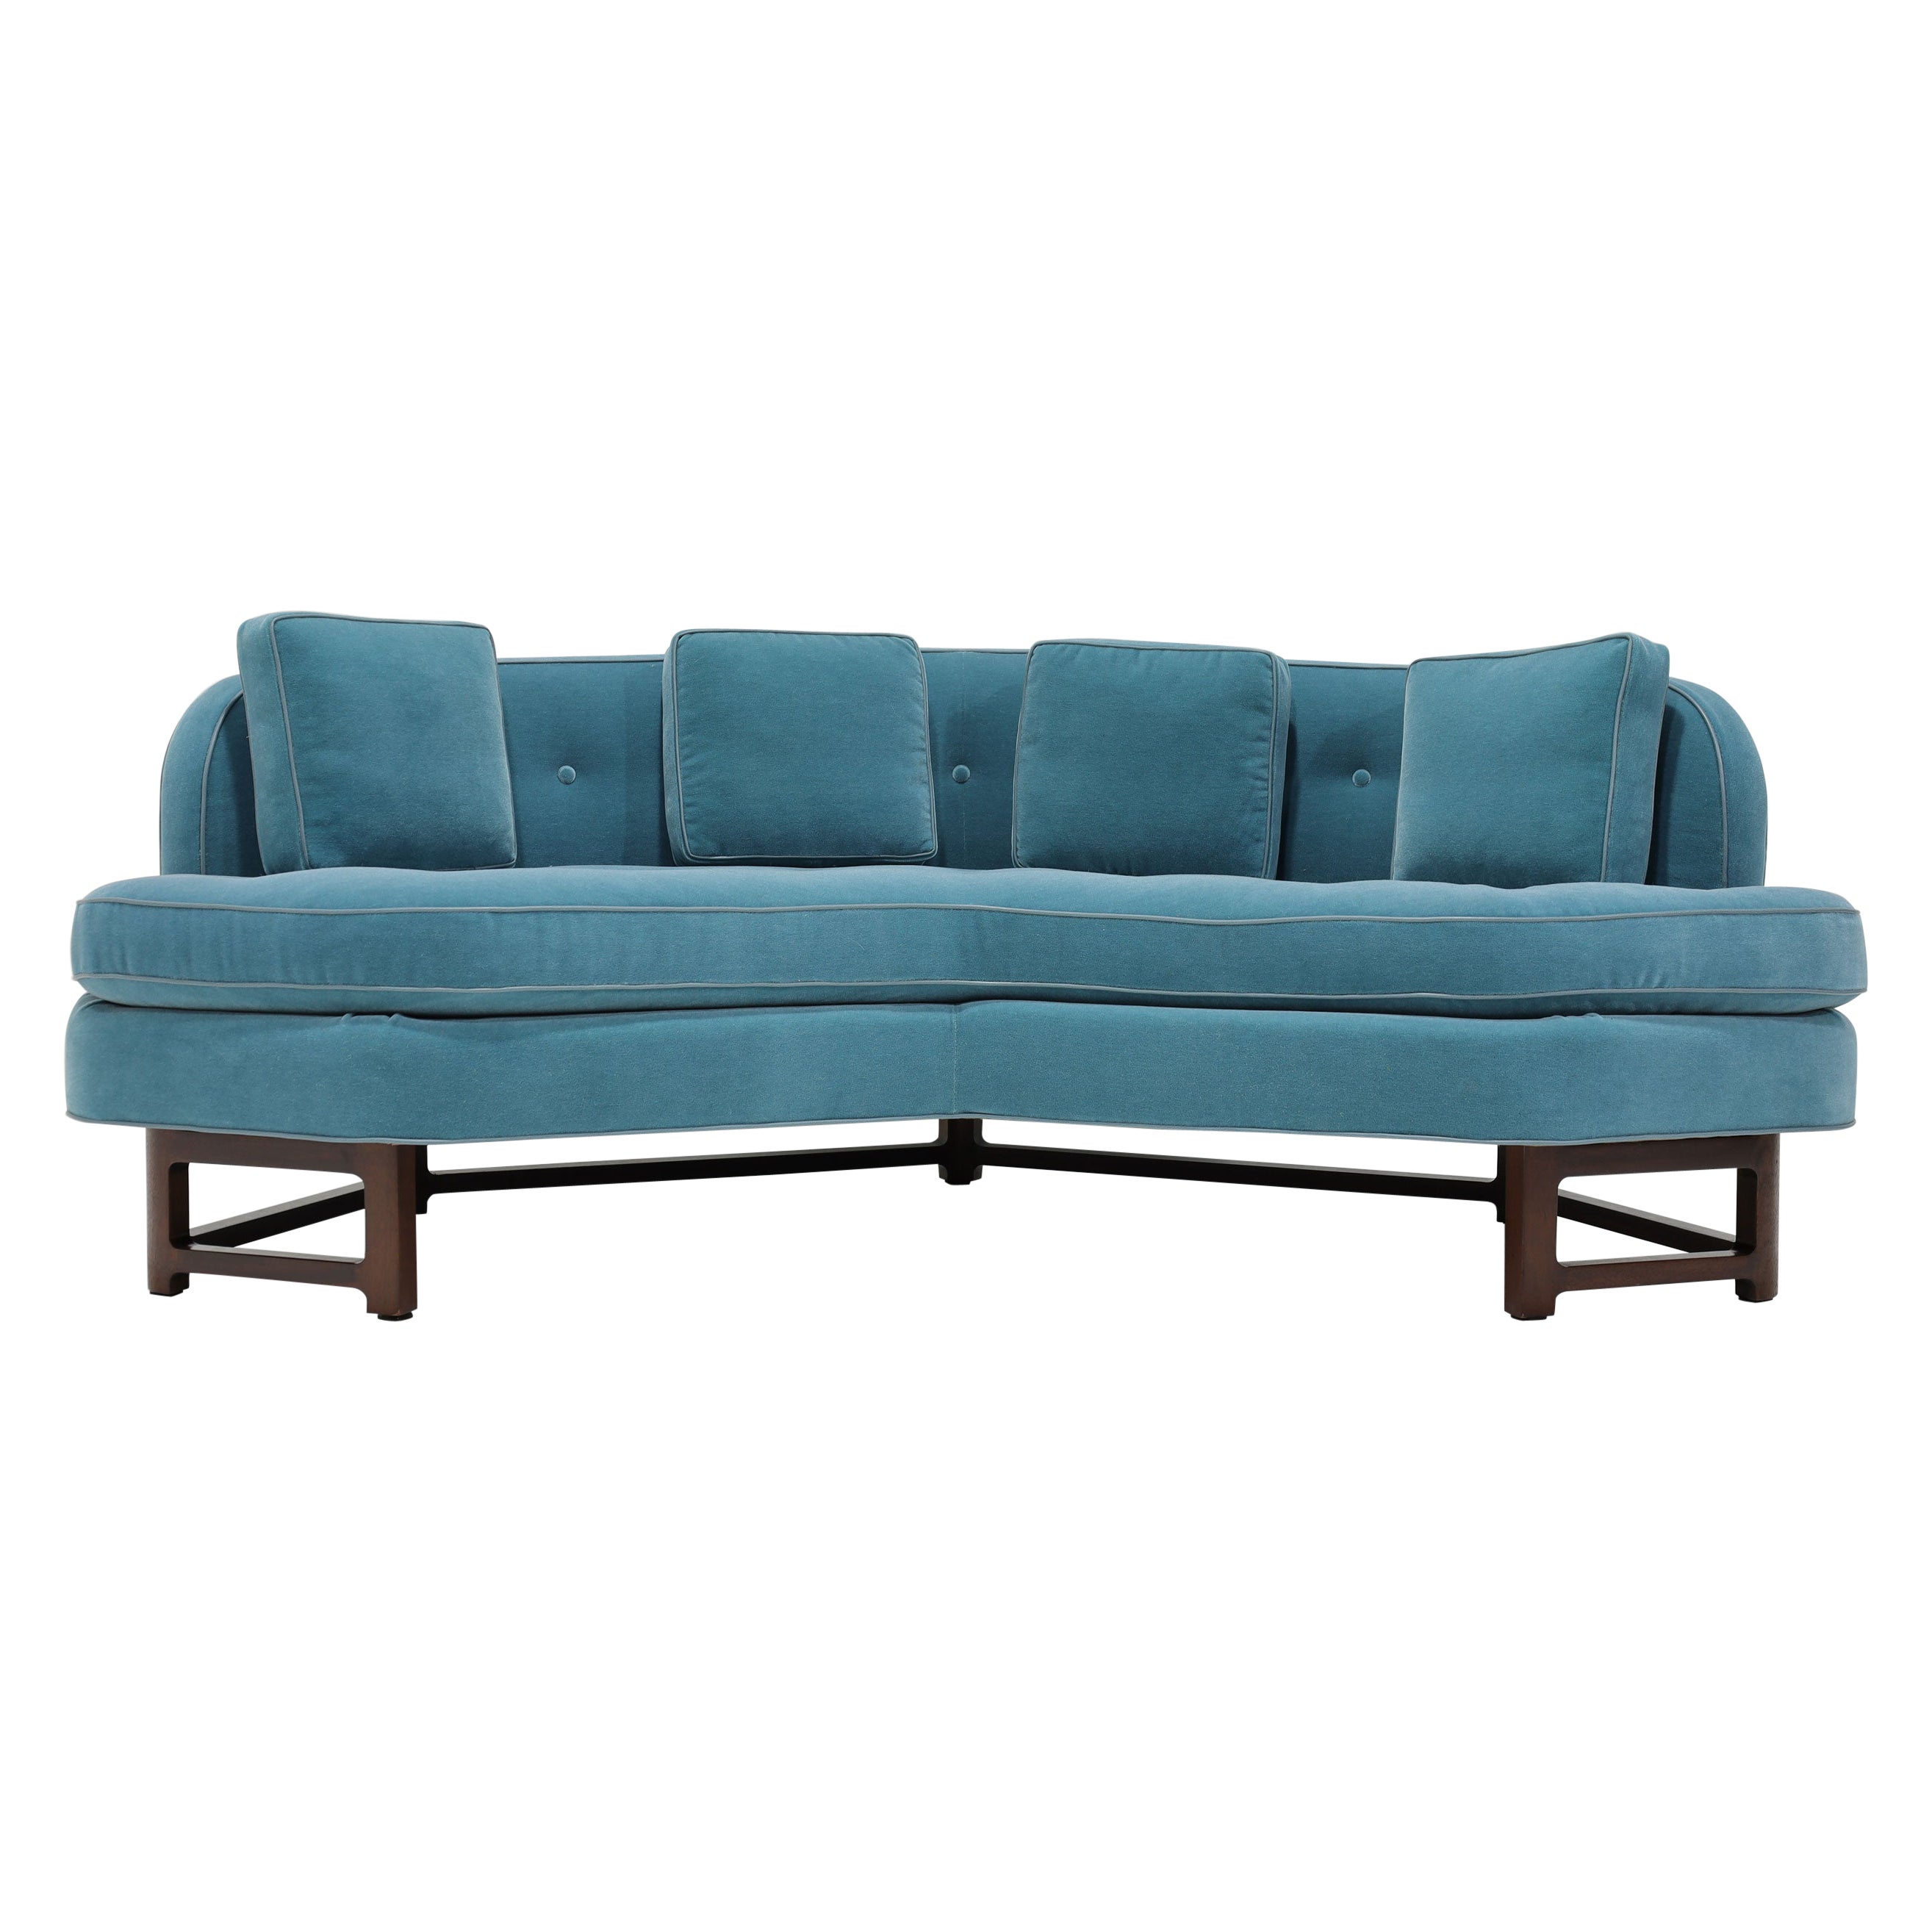 Edward Wormley for Dunbar Janus Collection Angle Sofa in Blue Mohair For Sale